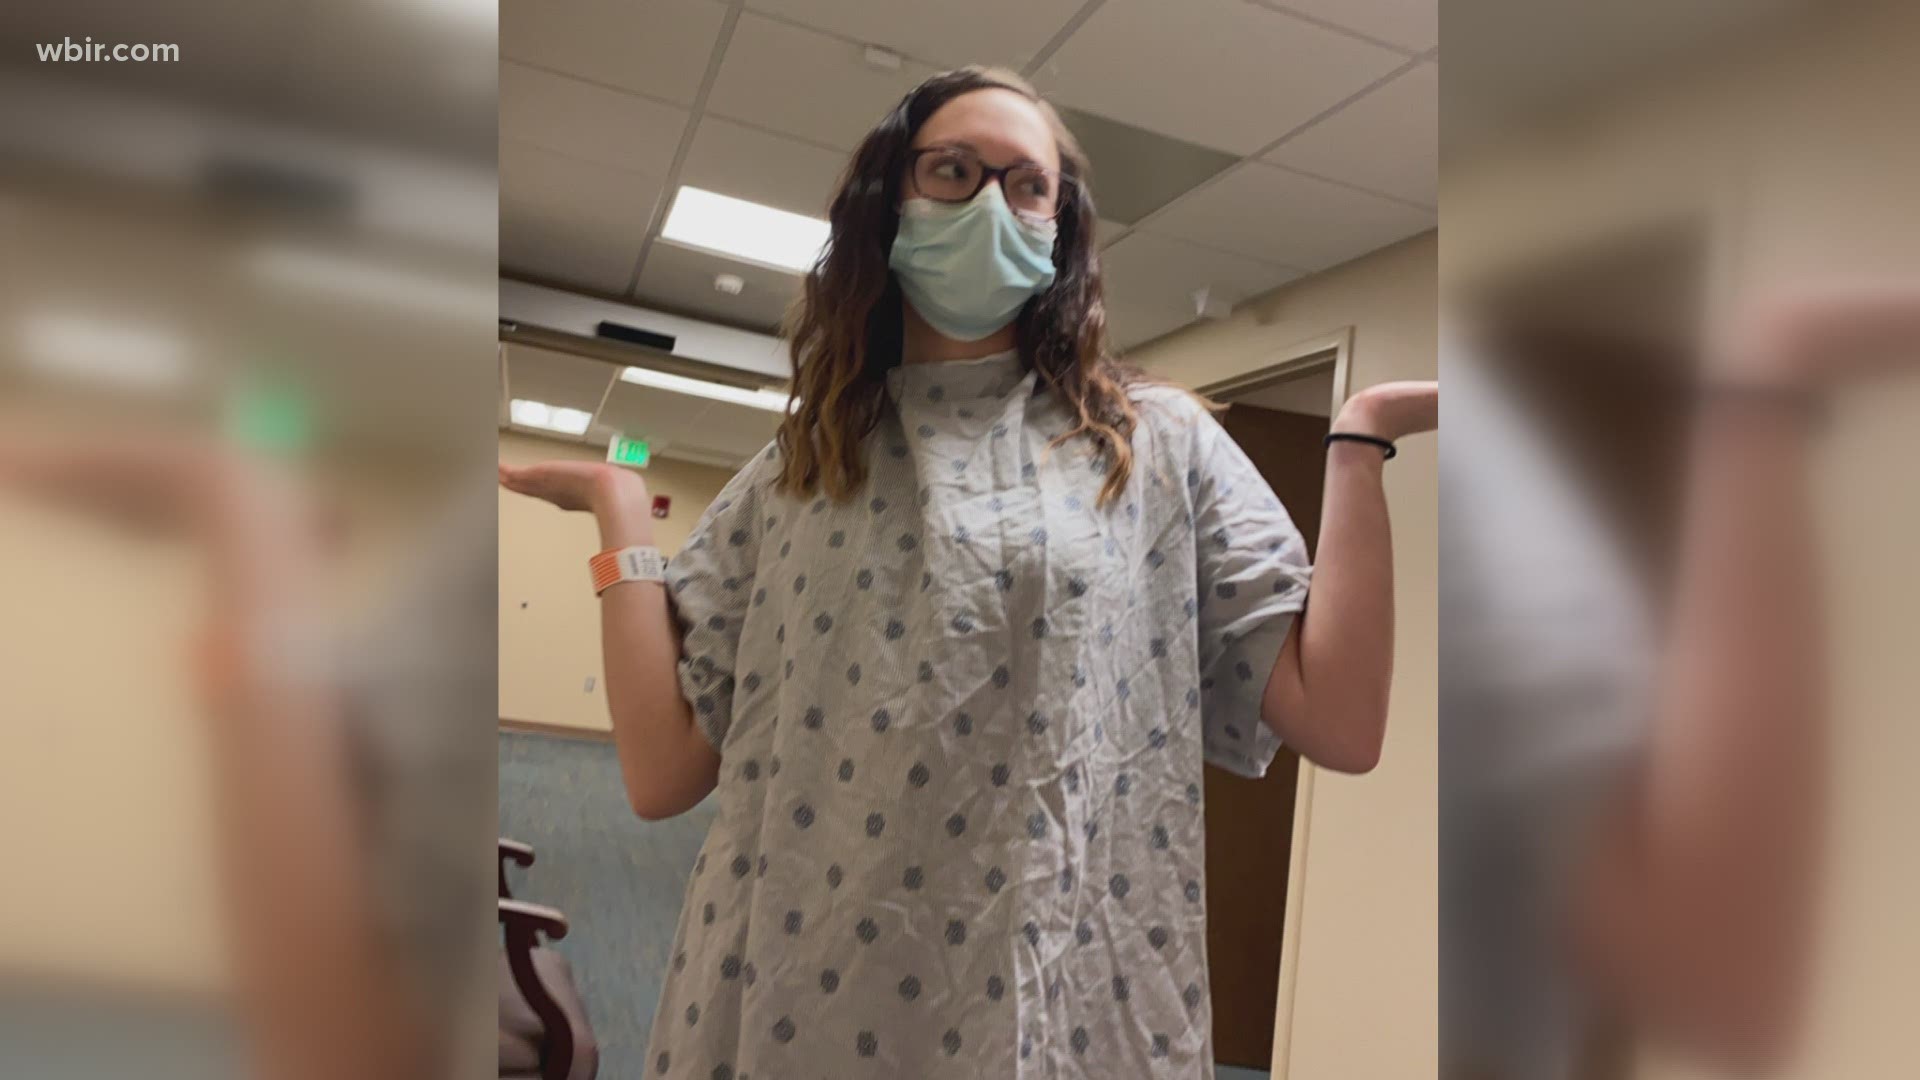 Savannah Flatford, 22, had a scary experience with an MRI as doctors searched for a diagnosis. Now, she's helping others through that process as an X-ray tech.